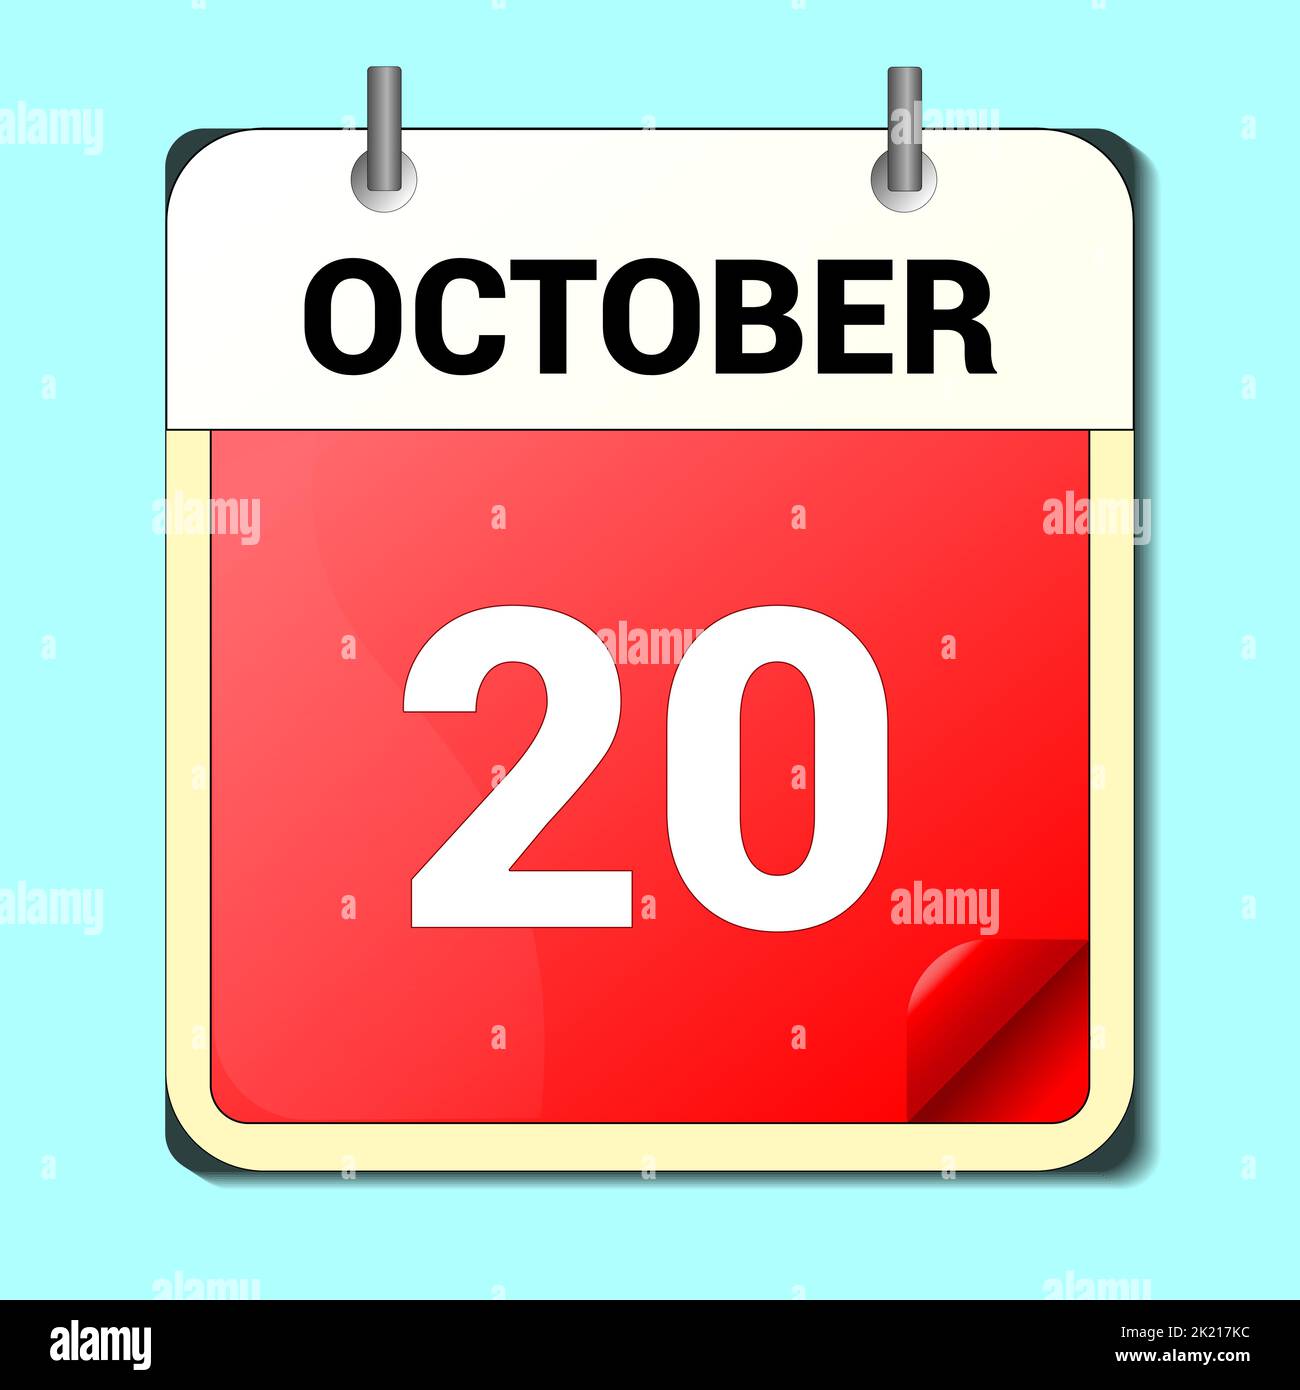 day on the calendar, vector image format, october 9 Stock Vector